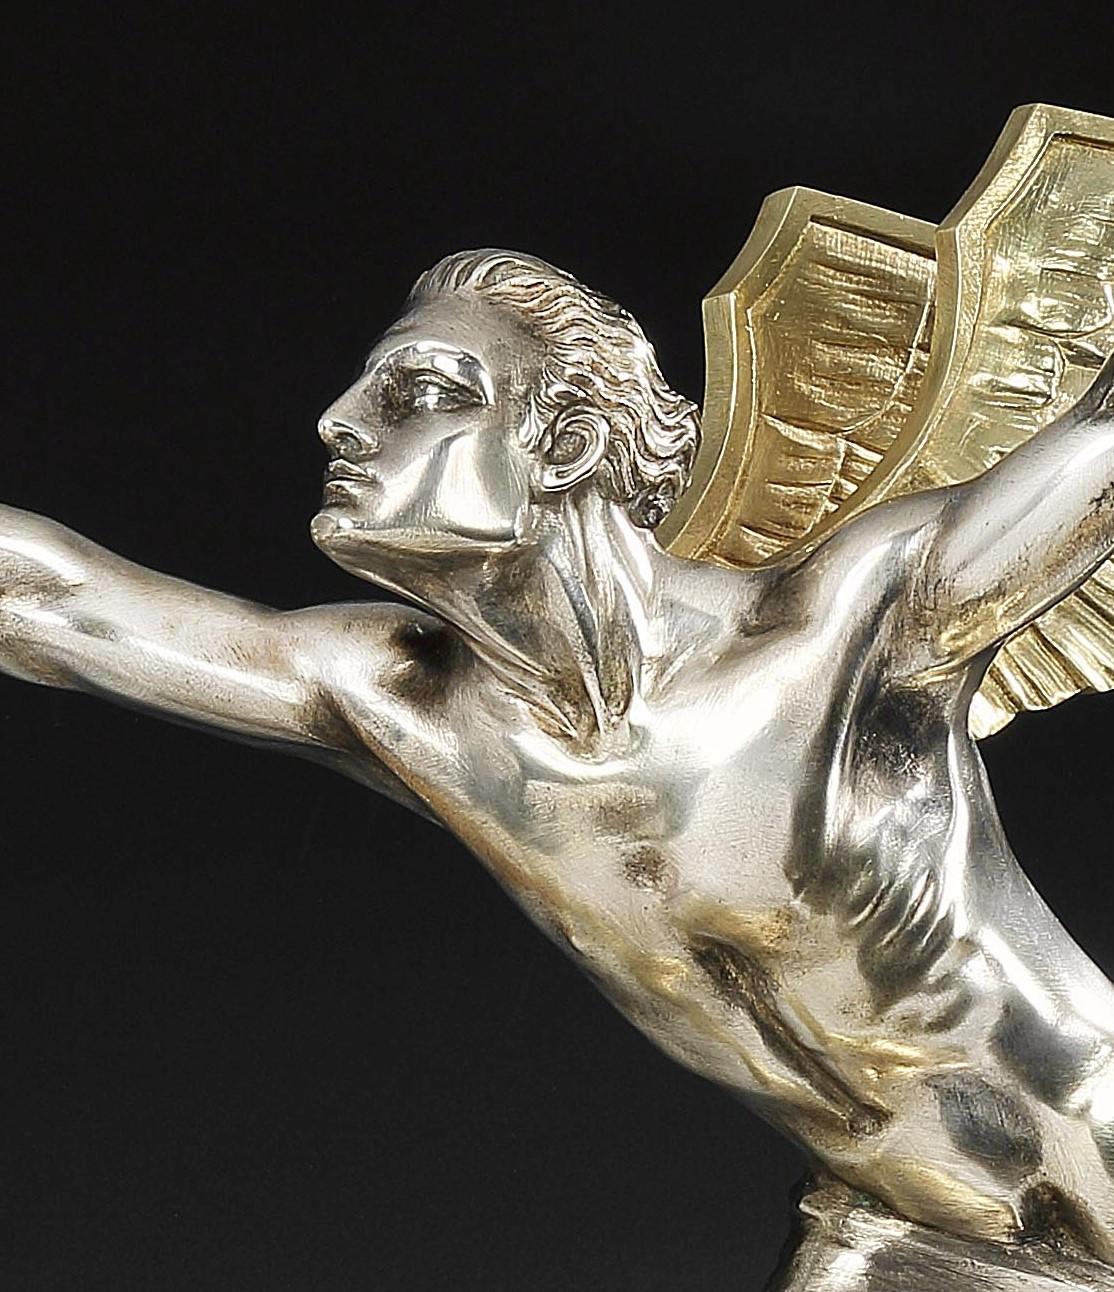 A highly evocative Art Deco bronze, depicting a typical ‘Speed God’ by French sculptor Frederic C. Focht (1879-1937). The silvered and gilded bronze portrays the sculptor’s willingness to embrace the Machine Age in a period of history where the